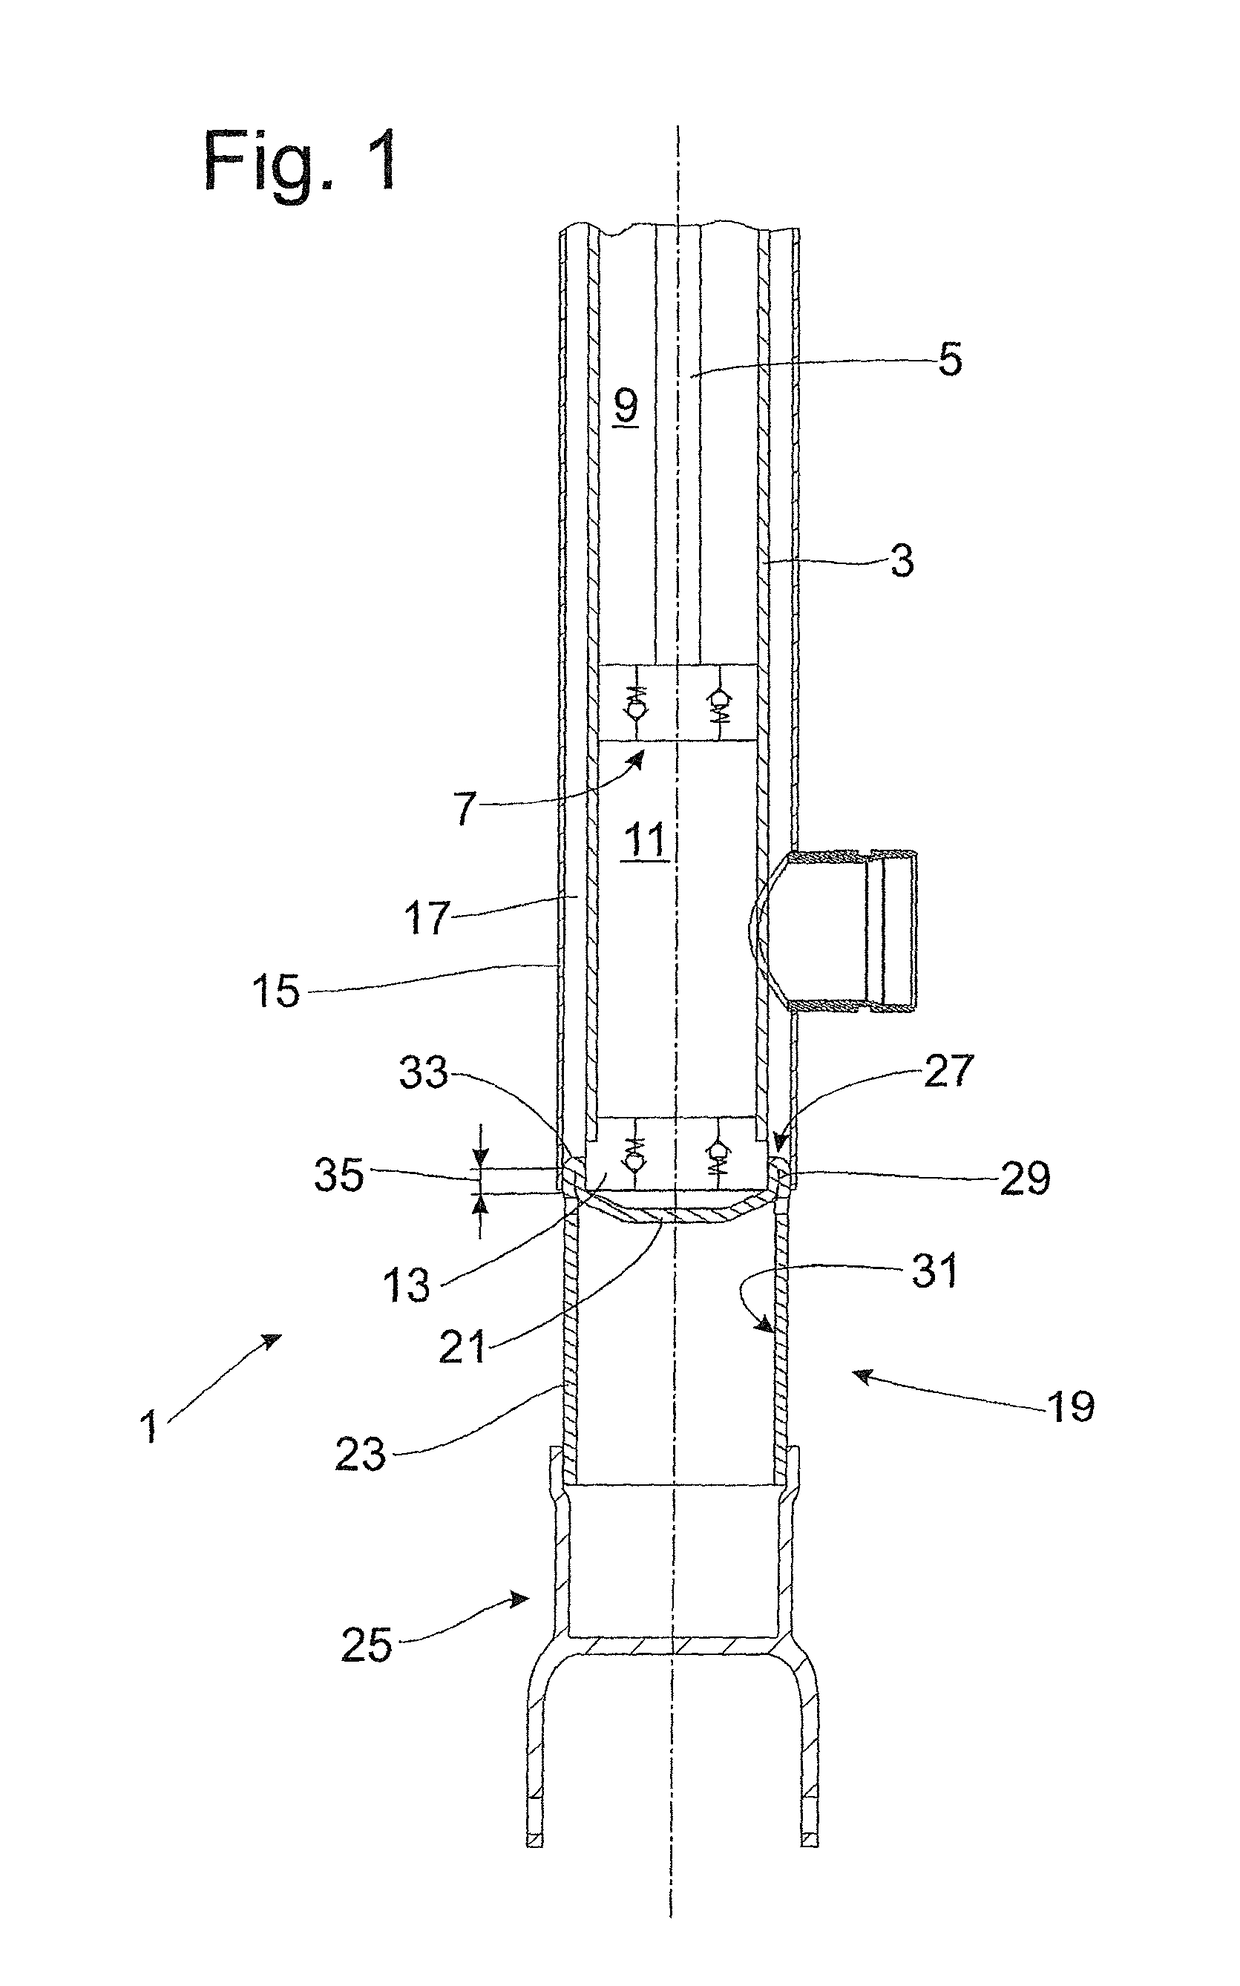 Extension for a shock absorber